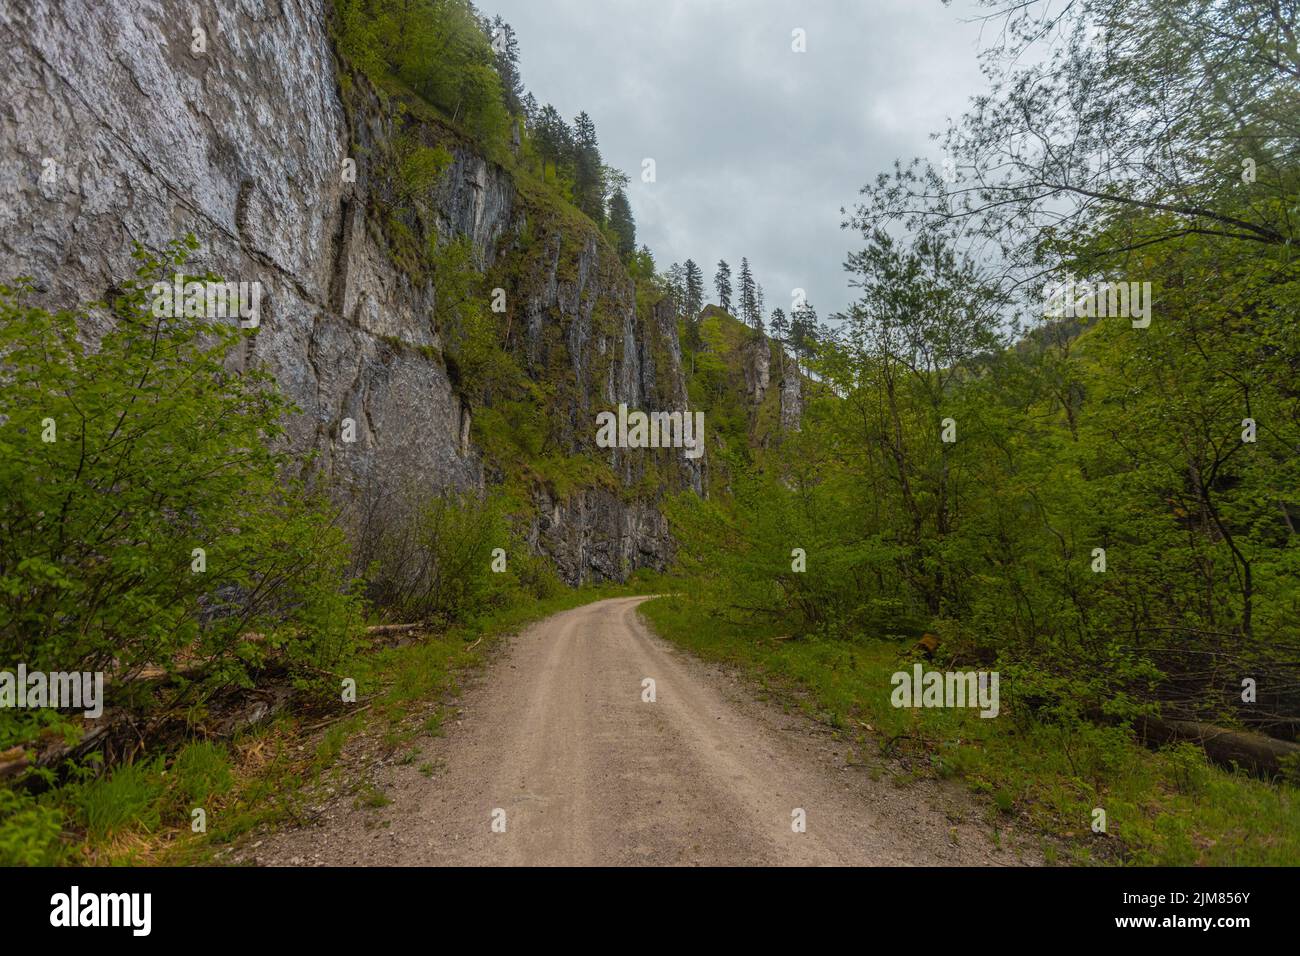 Road on the ex Reichraming narrow gauge railway, small gauge forest railway in central austria. Visible cliff and road in a curve. Stock Photo